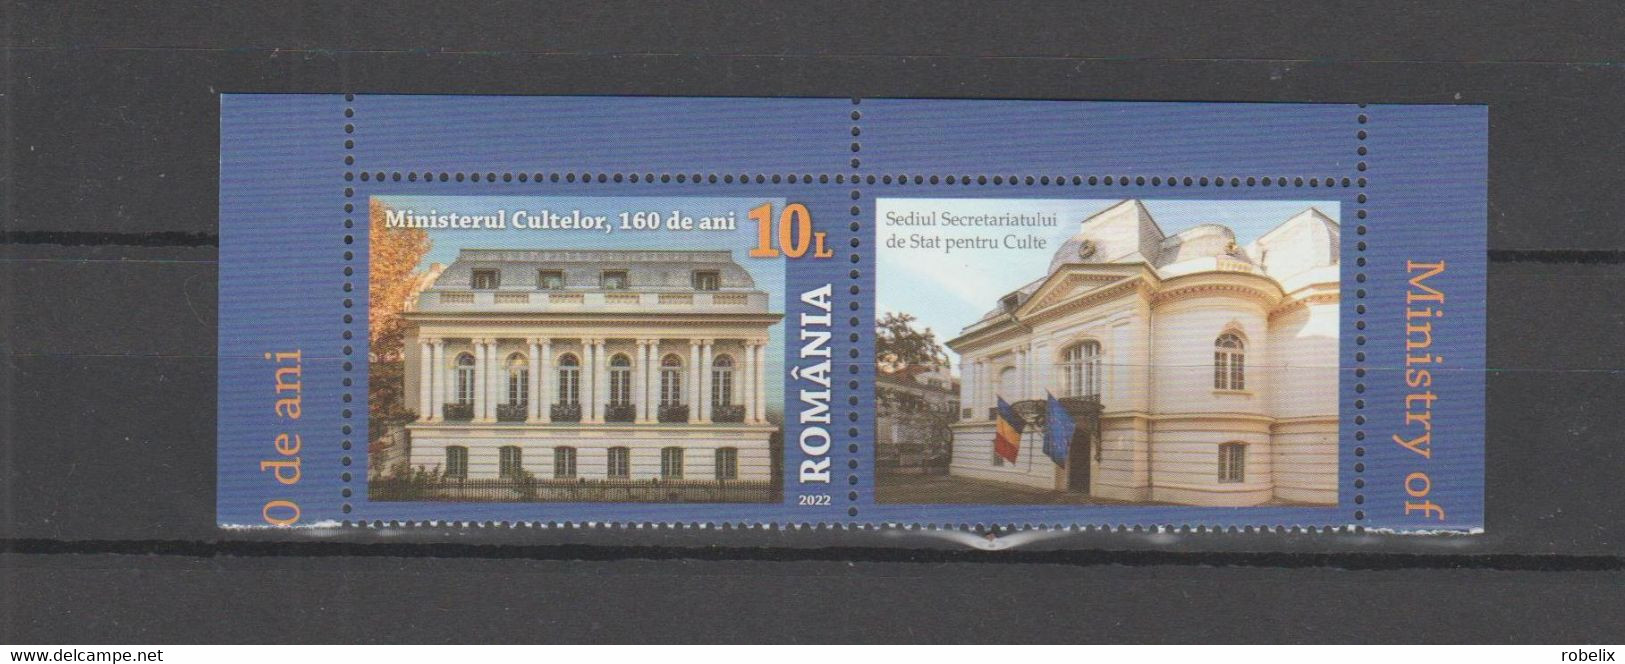 ROMANIA  2022  Ministry Of Religious Affairs, 160 Years - Set Of 1 Stamp With Label  MNH** - Neufs